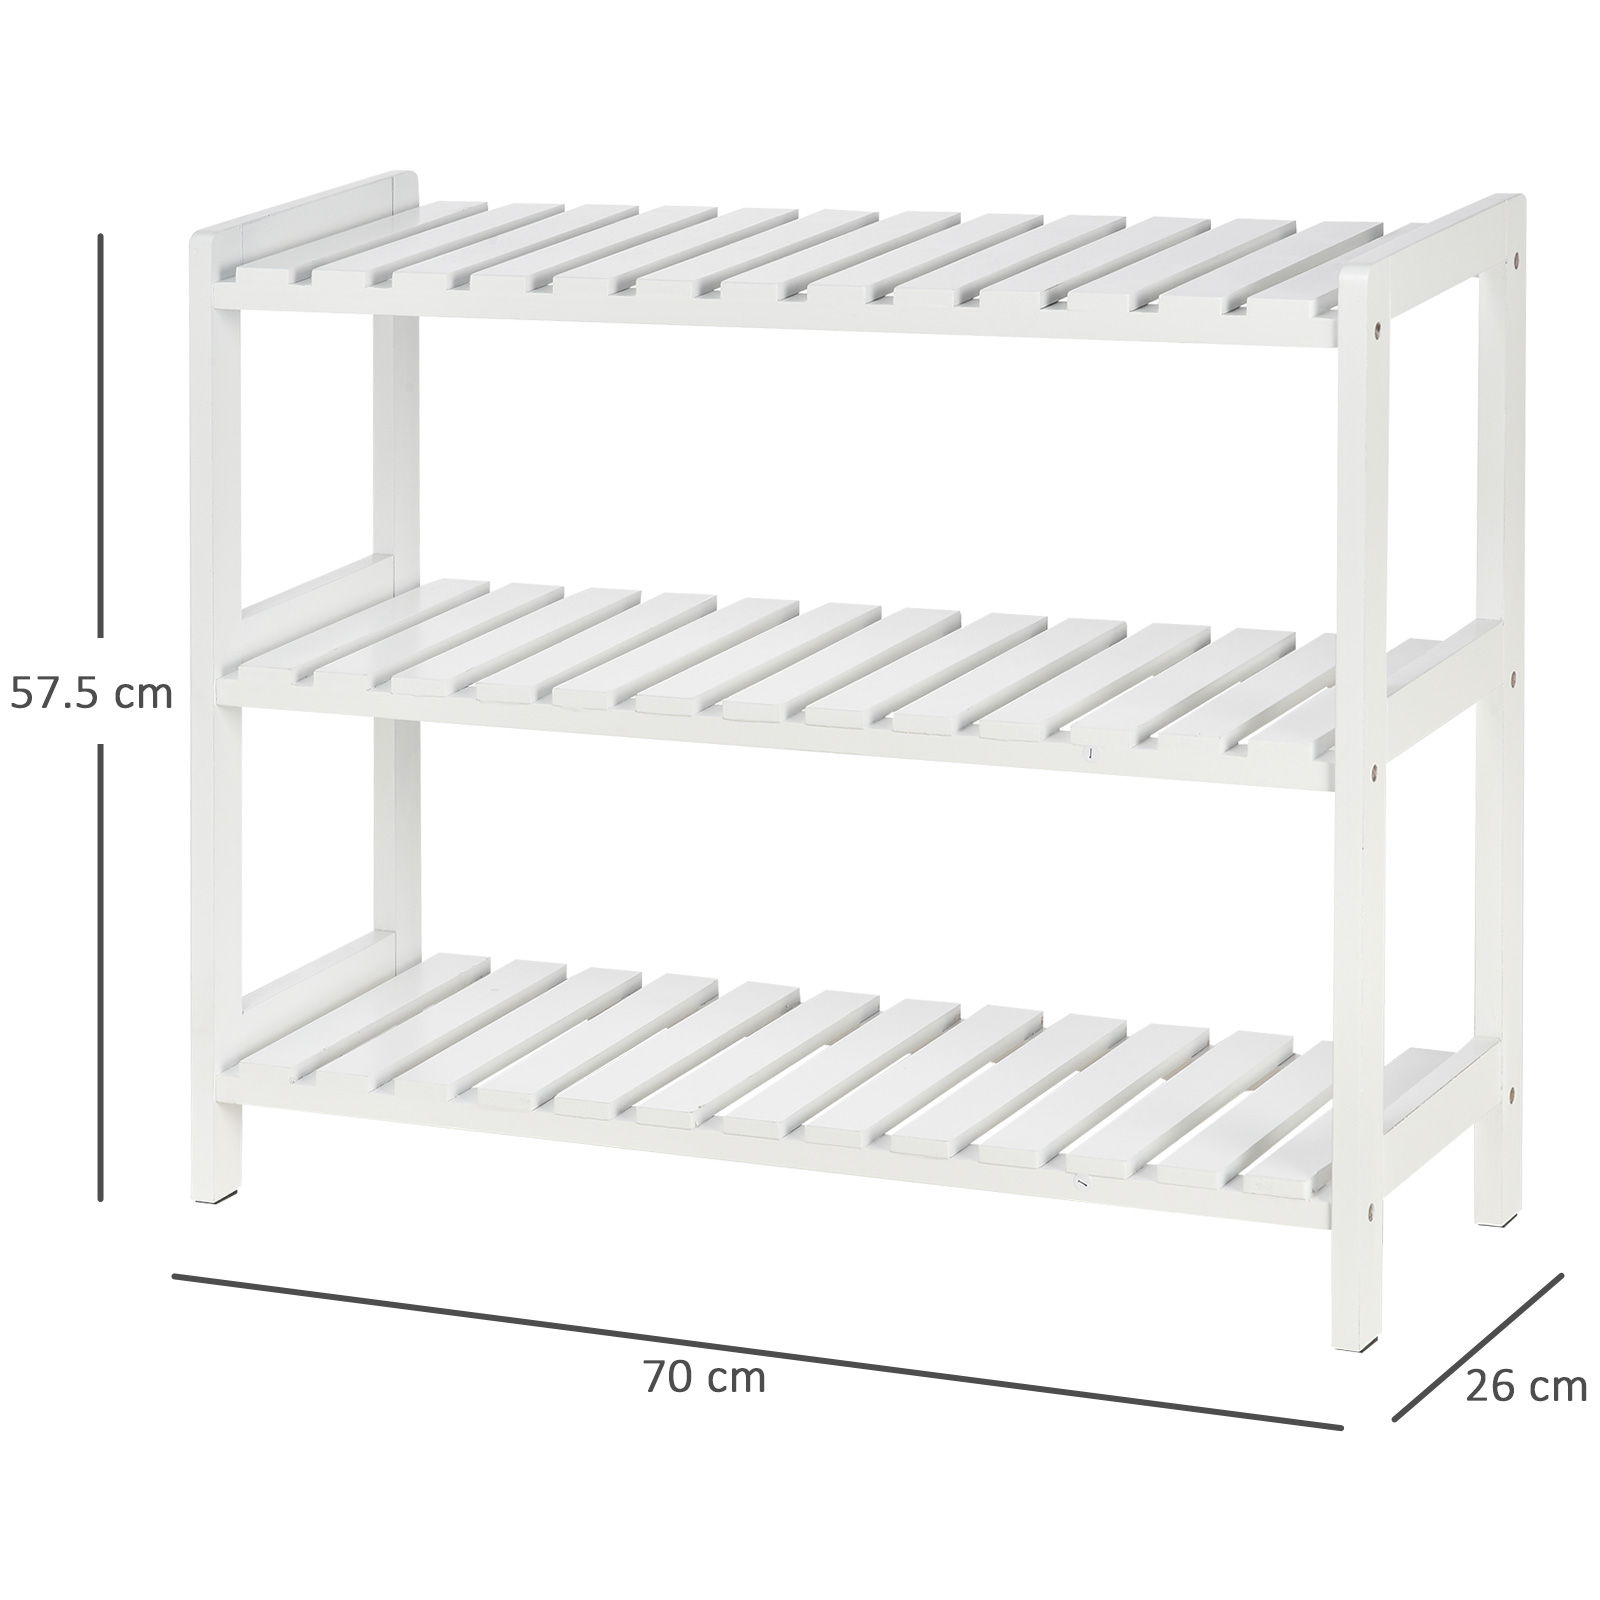 HOMCOM 3-Tier Shoe Rack Wood Frame Slatted Shelves Spacious Open Hygienic Storage Home Hallway Furniture Family Guests 70L x 26W x 57.5H cm - White